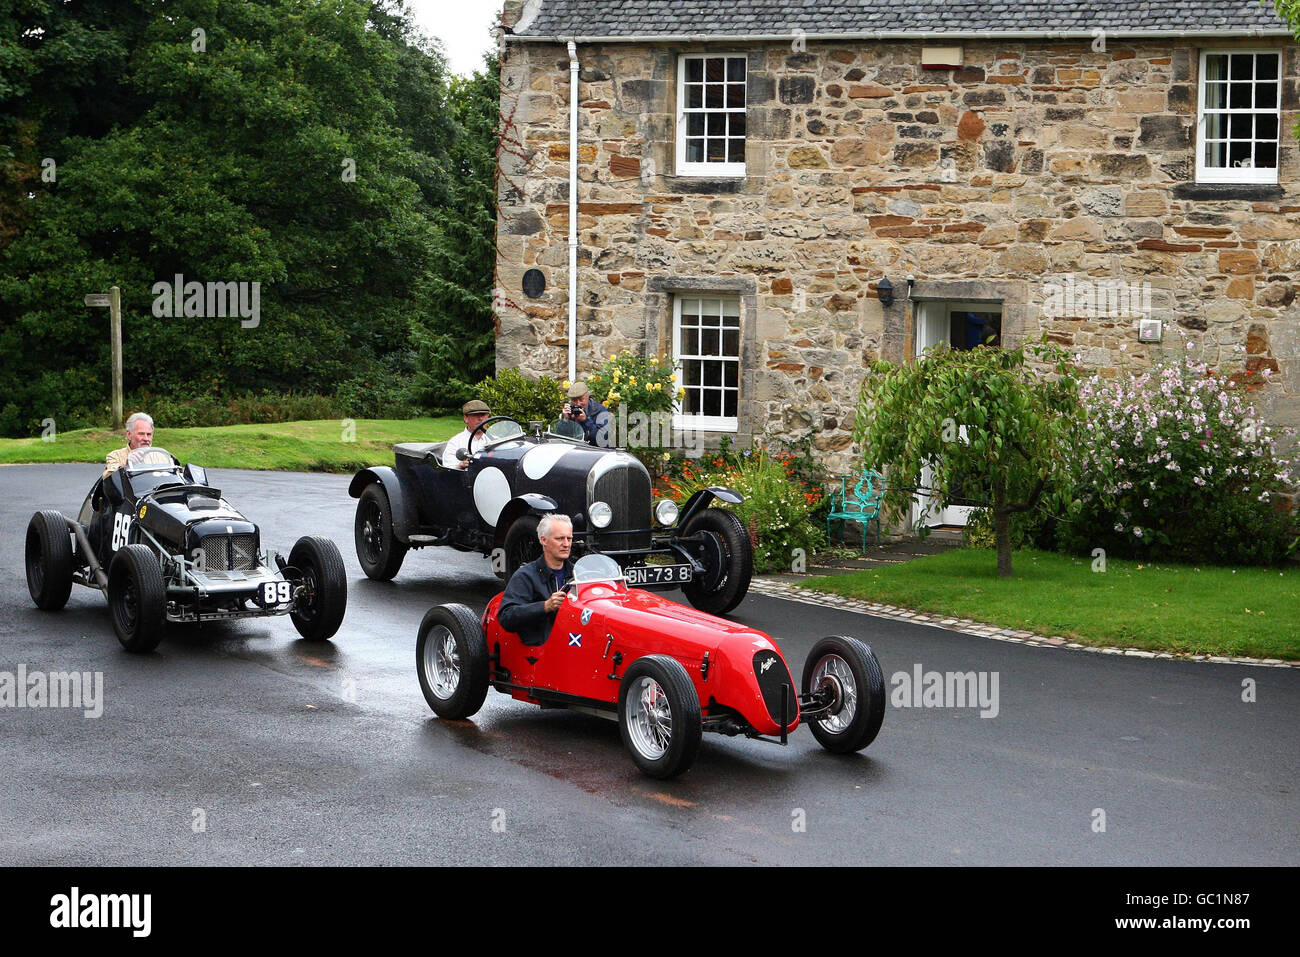 Three classic racing cars, a 1924 Bentley driven by Jock Mackinnon (rear right), a 1937 Austin 7 special driven by Steve Smith (front) and a 1953 Fairley Mercury driven by Alex brown (rear left), race past Duchess Anne Cottages on the Kinneil Estate at a preview of the forthcoming Bo'ness Speed Hill Climb being held there on Saturday 12 and Sunday 13th September. More than 120 classic cars and motorbikes from across the Uk will be blistering up Scotland's oldest permanent racetrack. Stock Photo